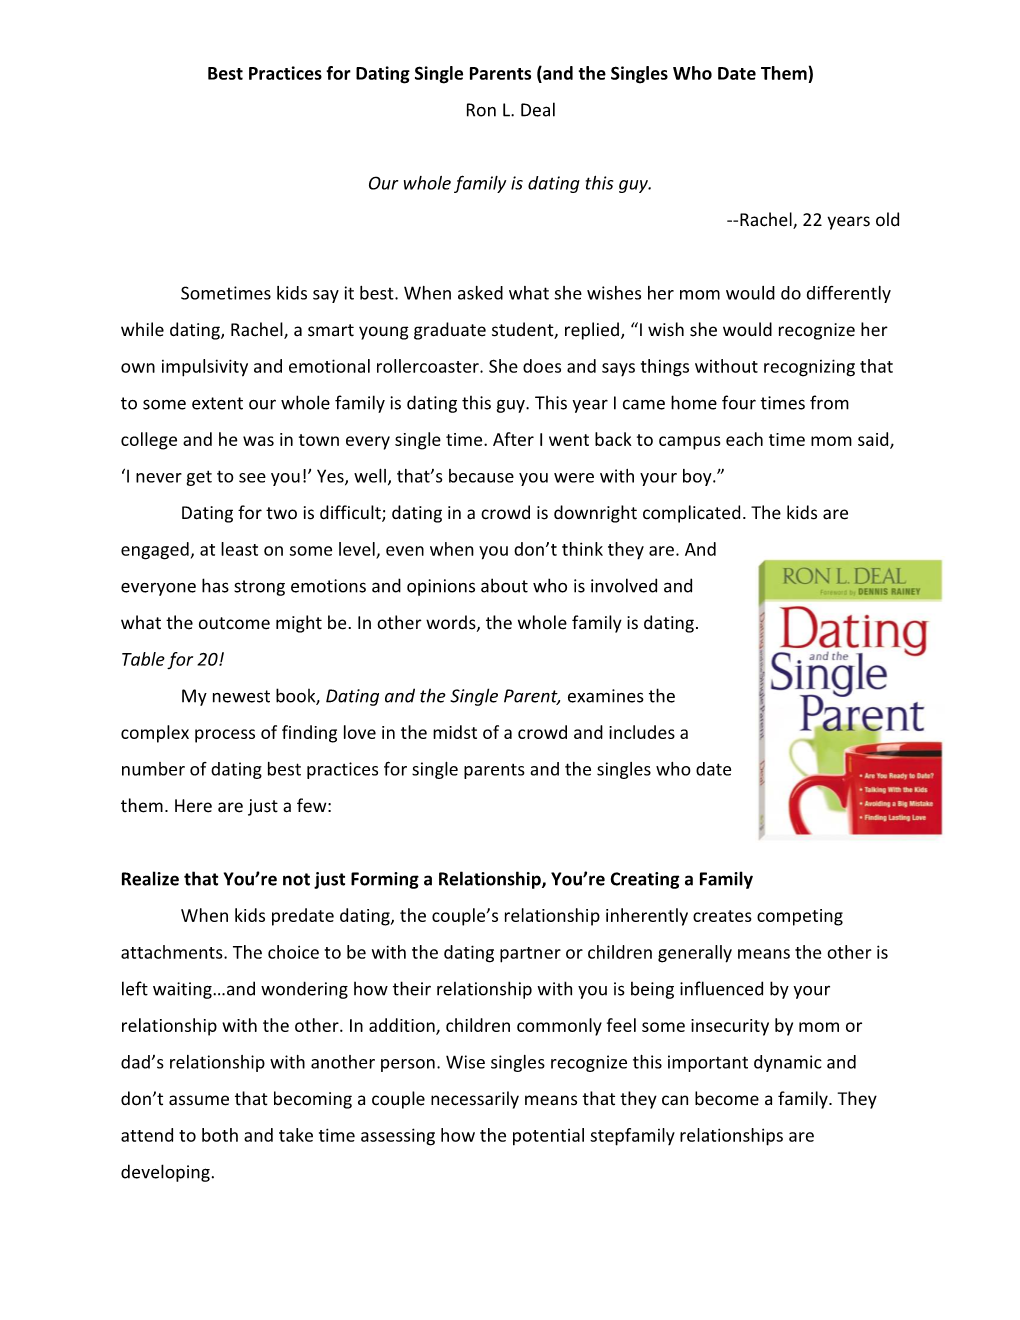 Best Practices for Dating Single Parents (And the Singles Who Date Them) Ron L